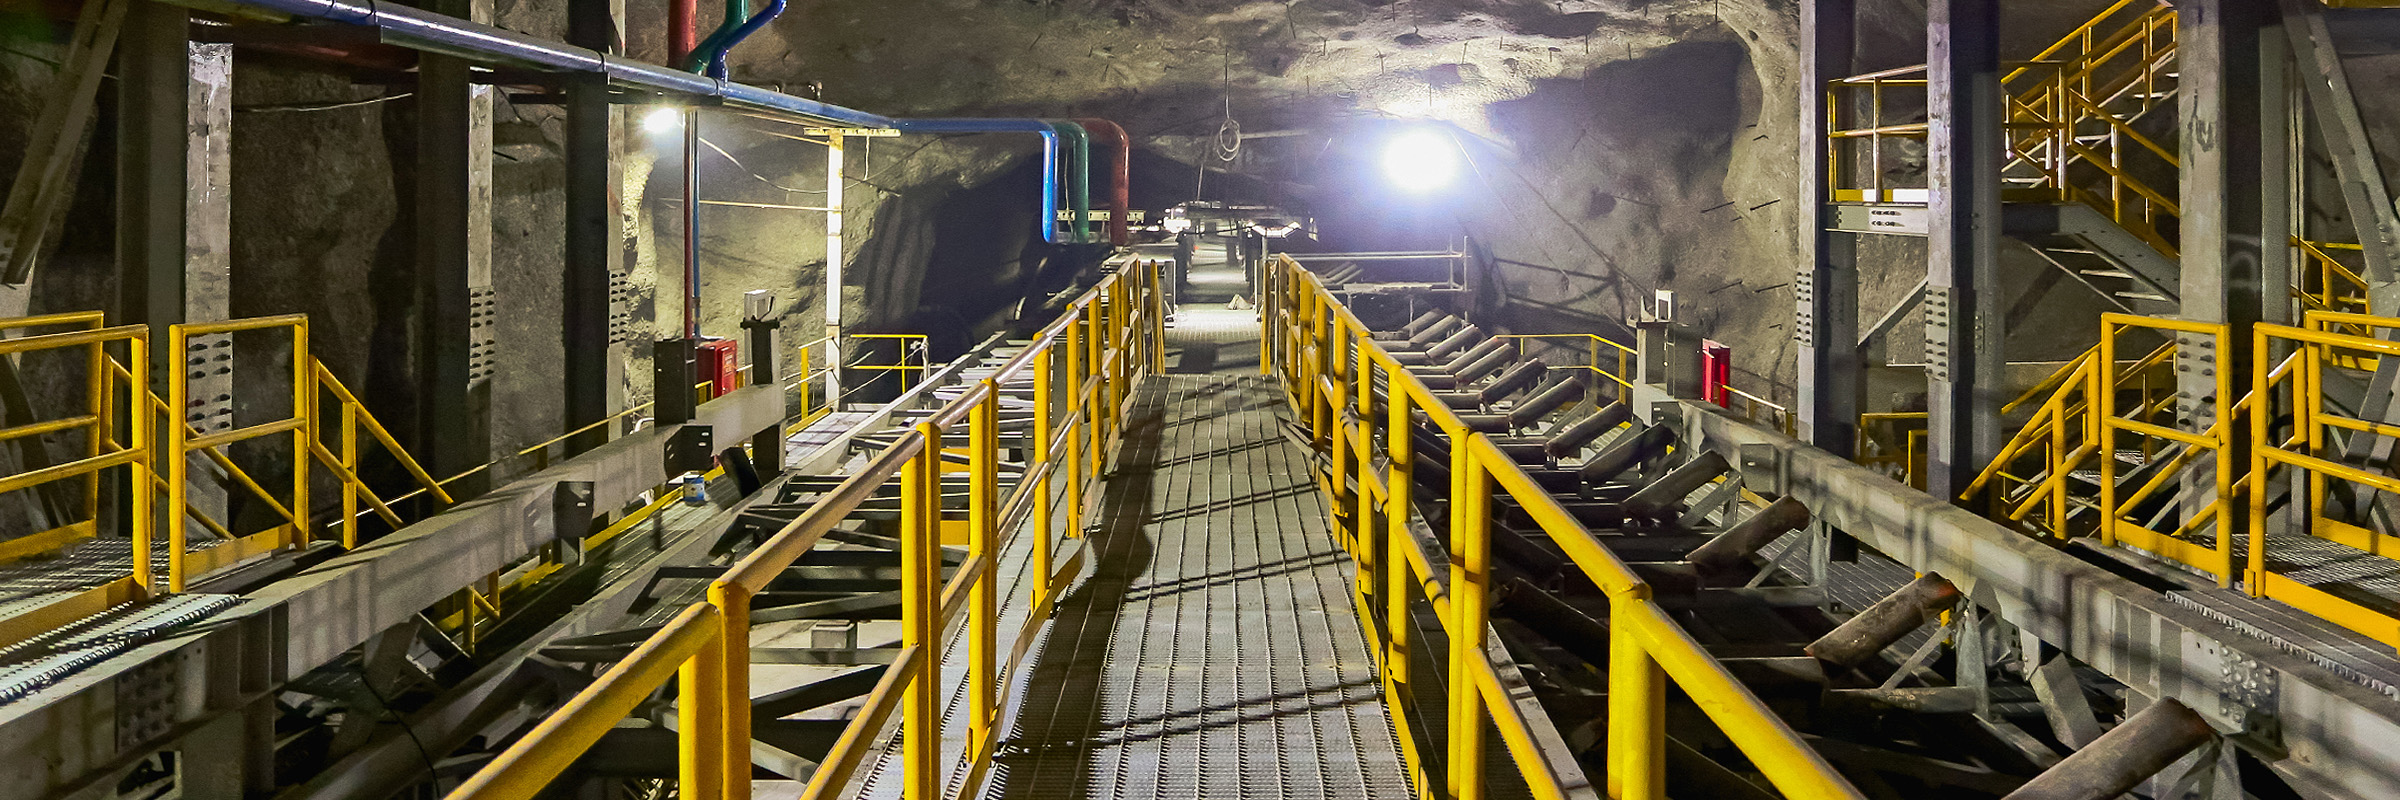 Applied Motor Controls for Underground Mining Applications